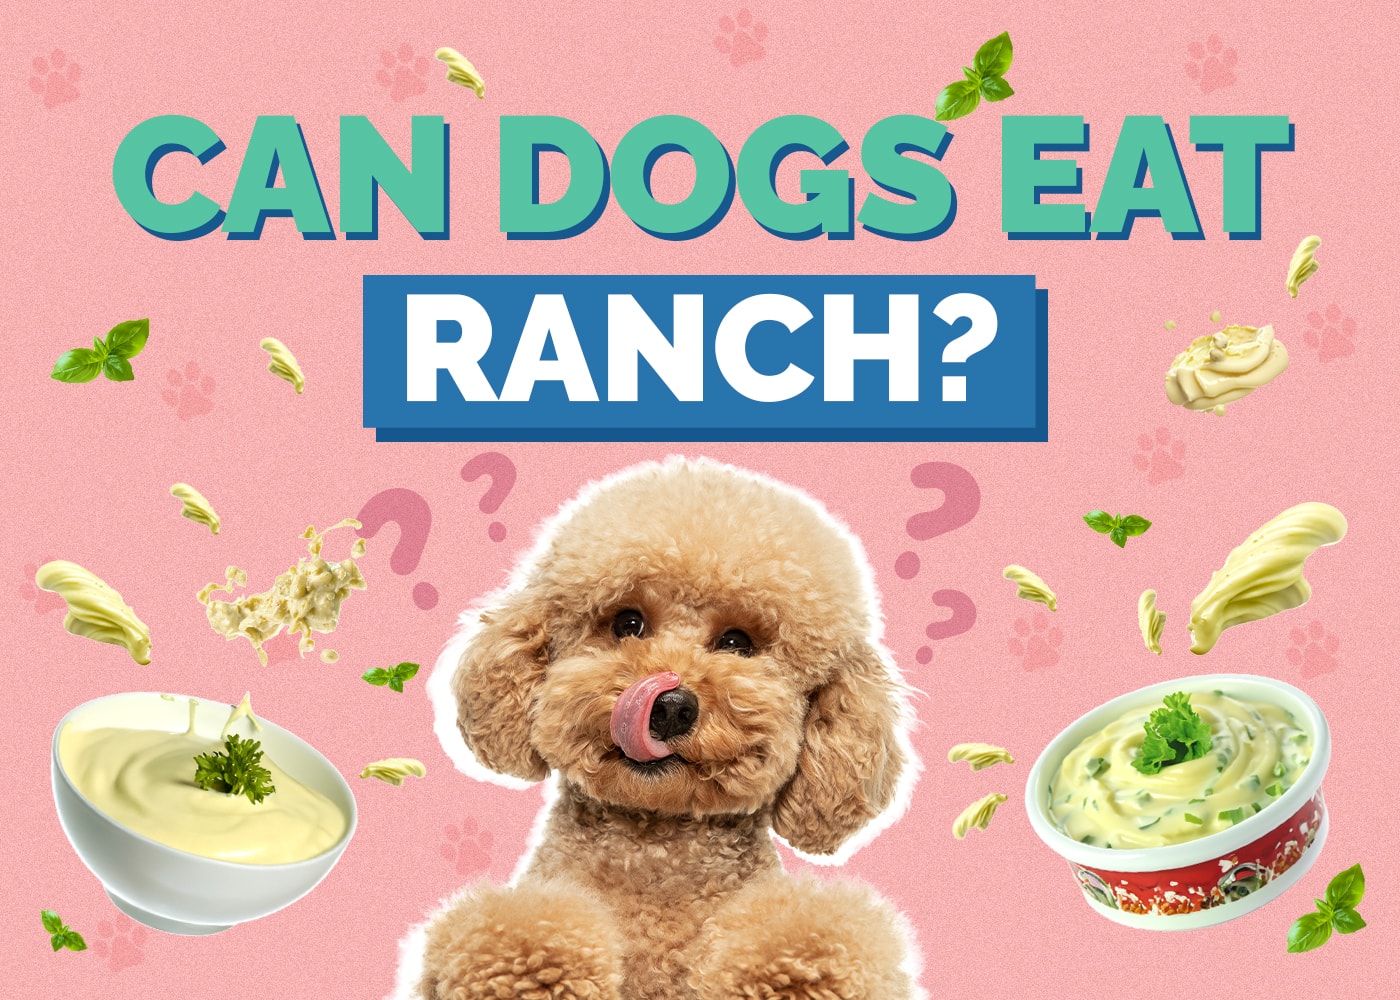 Can Dogs Eat Ranch